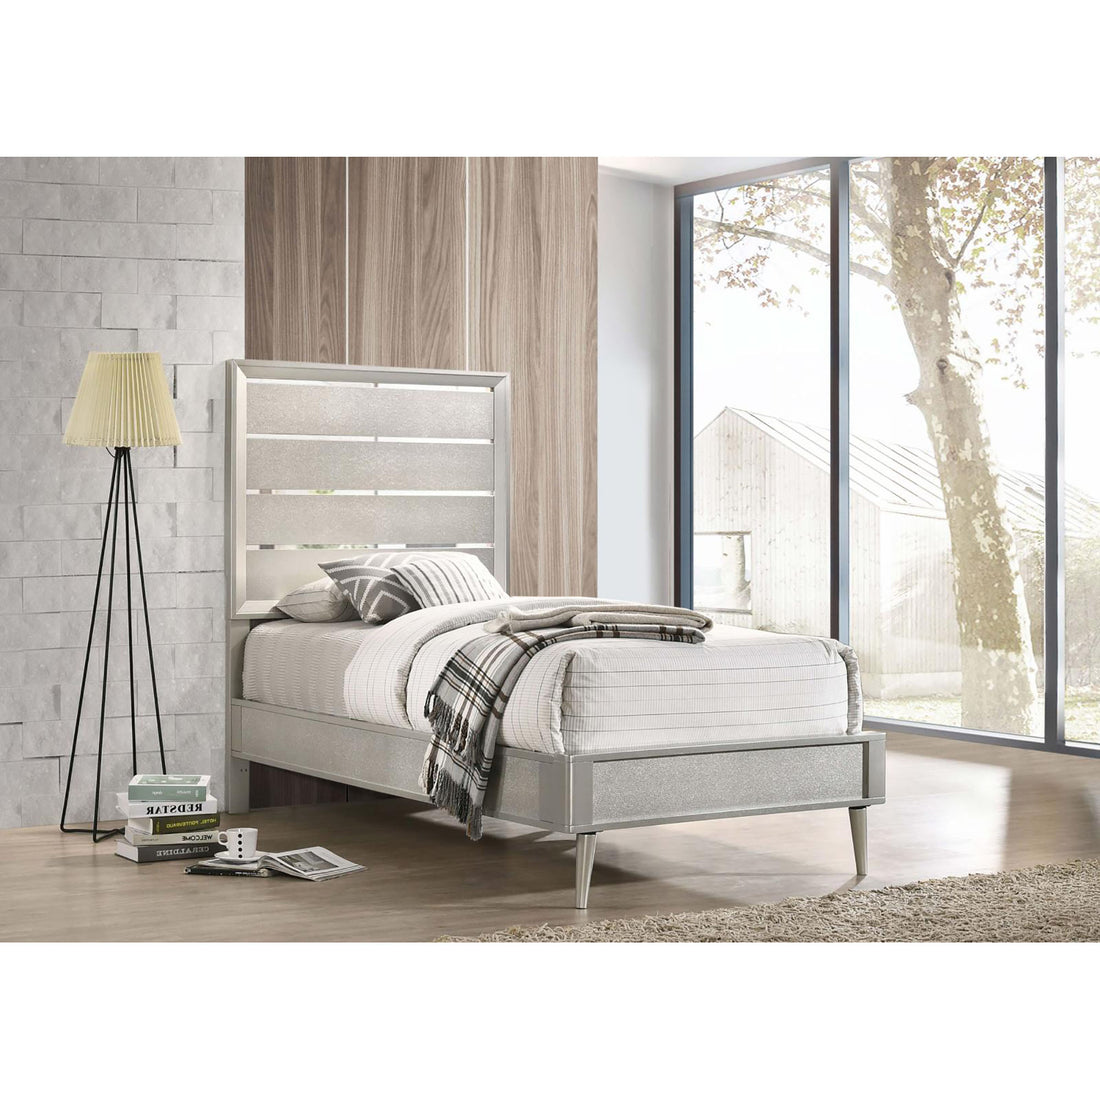 Metallic Sterling Panel Bed with Tapered Legs